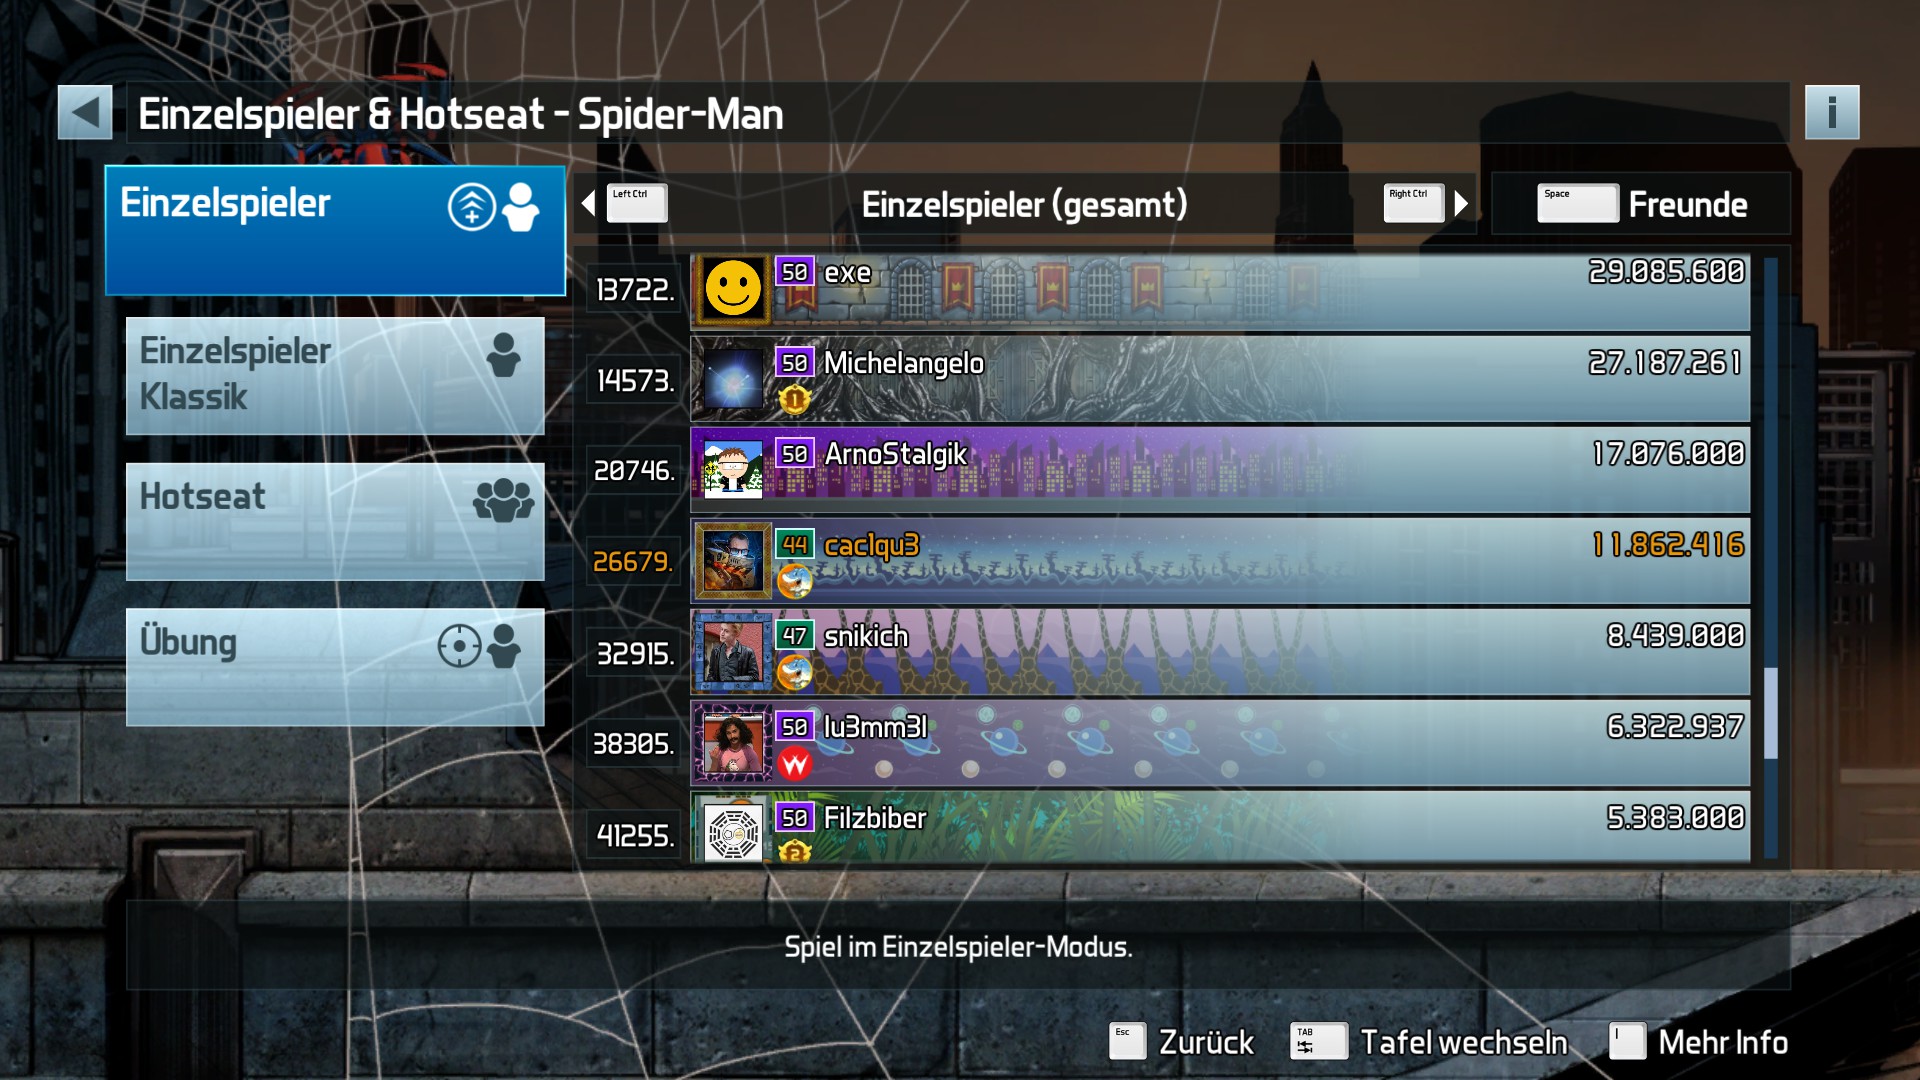 e2e4: Pinball FX3: Marvel: The Amazing Spider-Man [Standard] (PC) 11,862,416 points on 2022-05-24 22:39:44